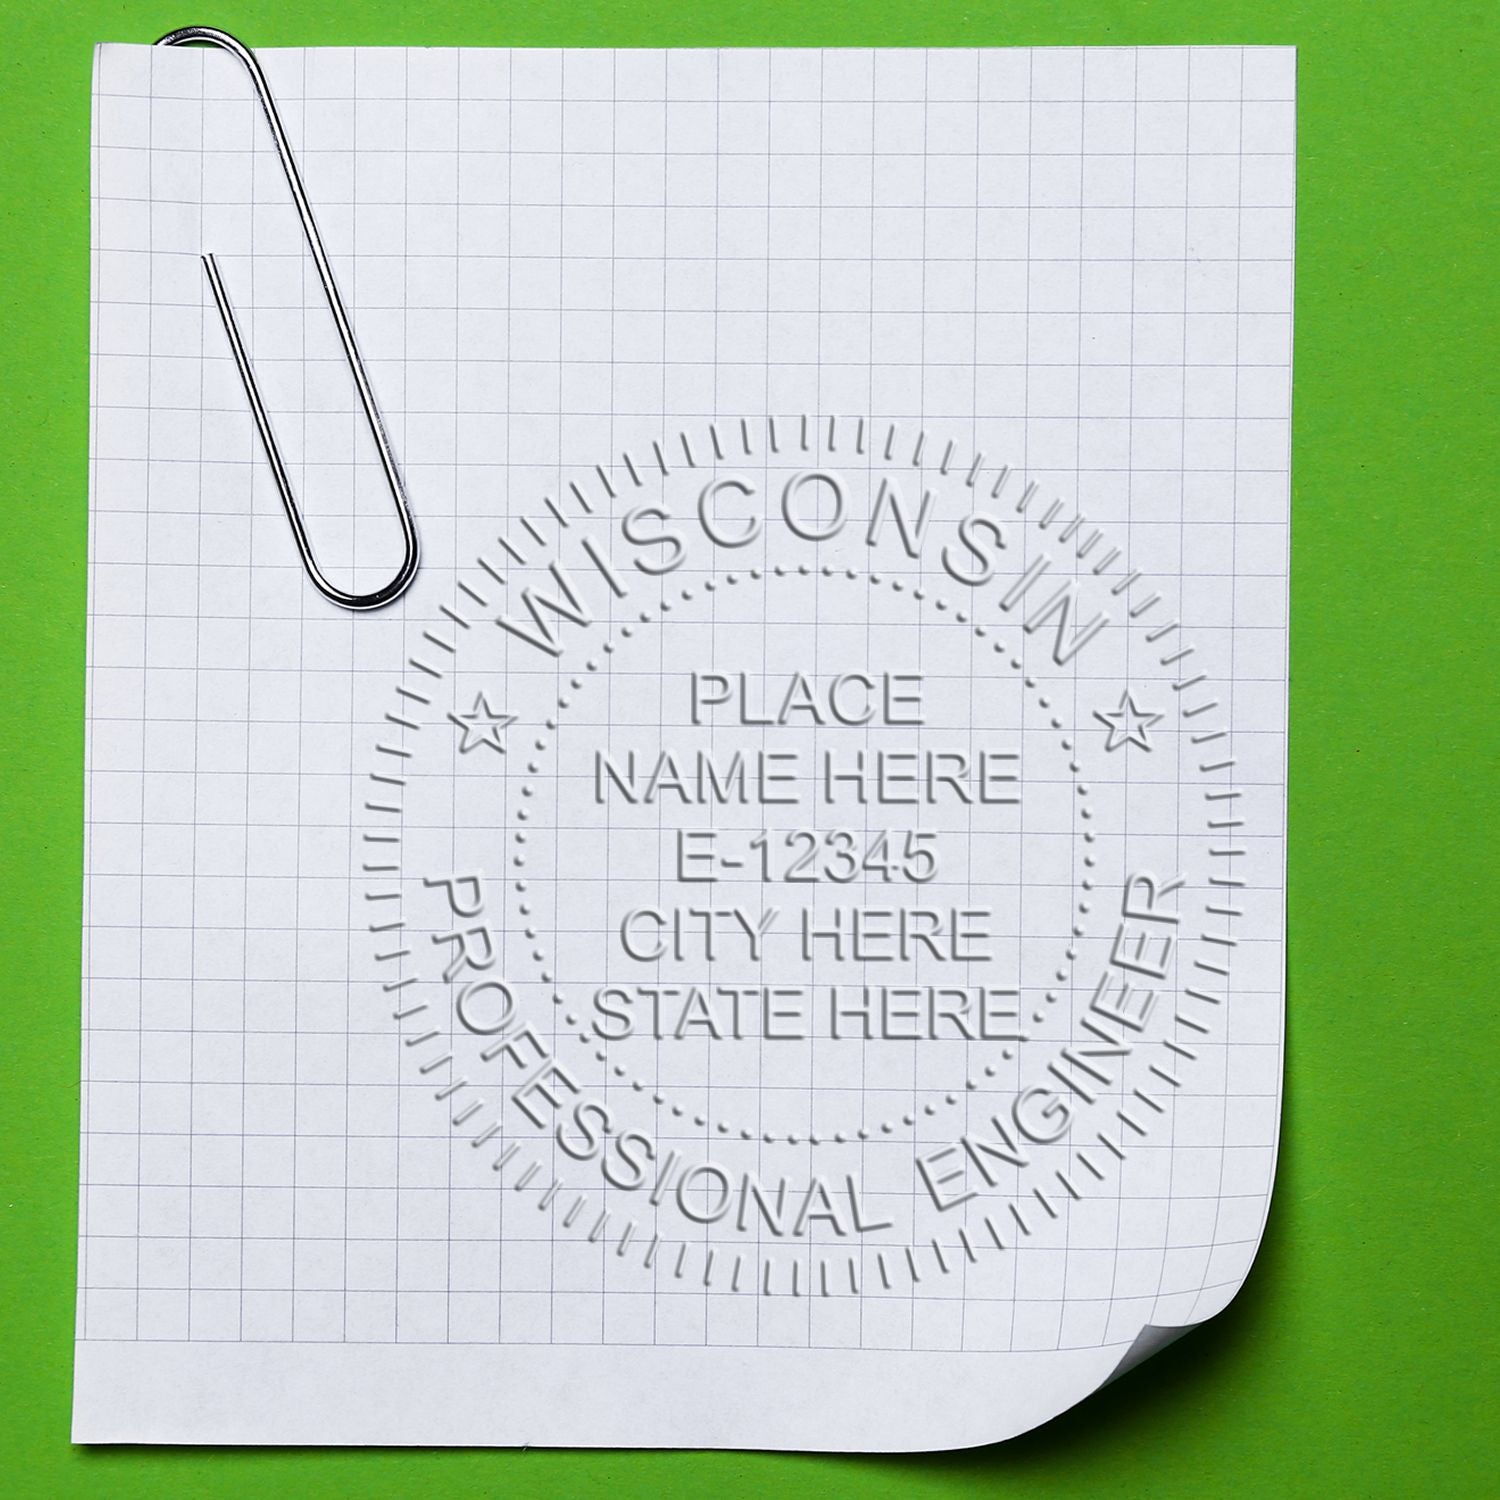 This paper is stamped with a sample imprint of the Soft Wisconsin Professional Engineer Seal, signifying its quality and reliability.